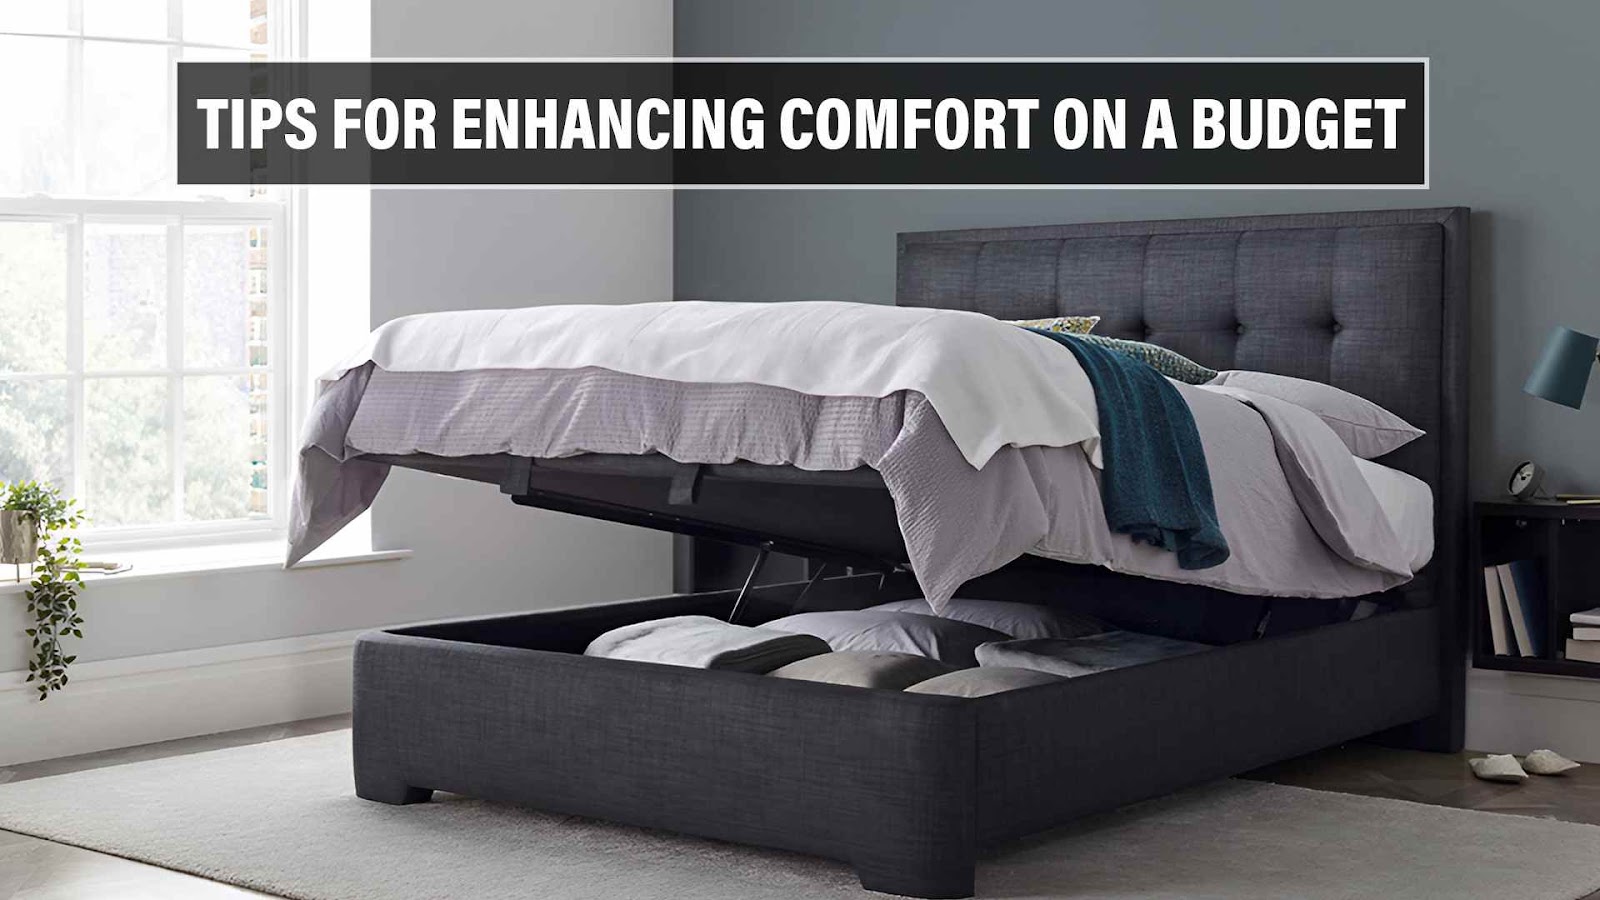 Tips for Enhancing Comfort on a Budget